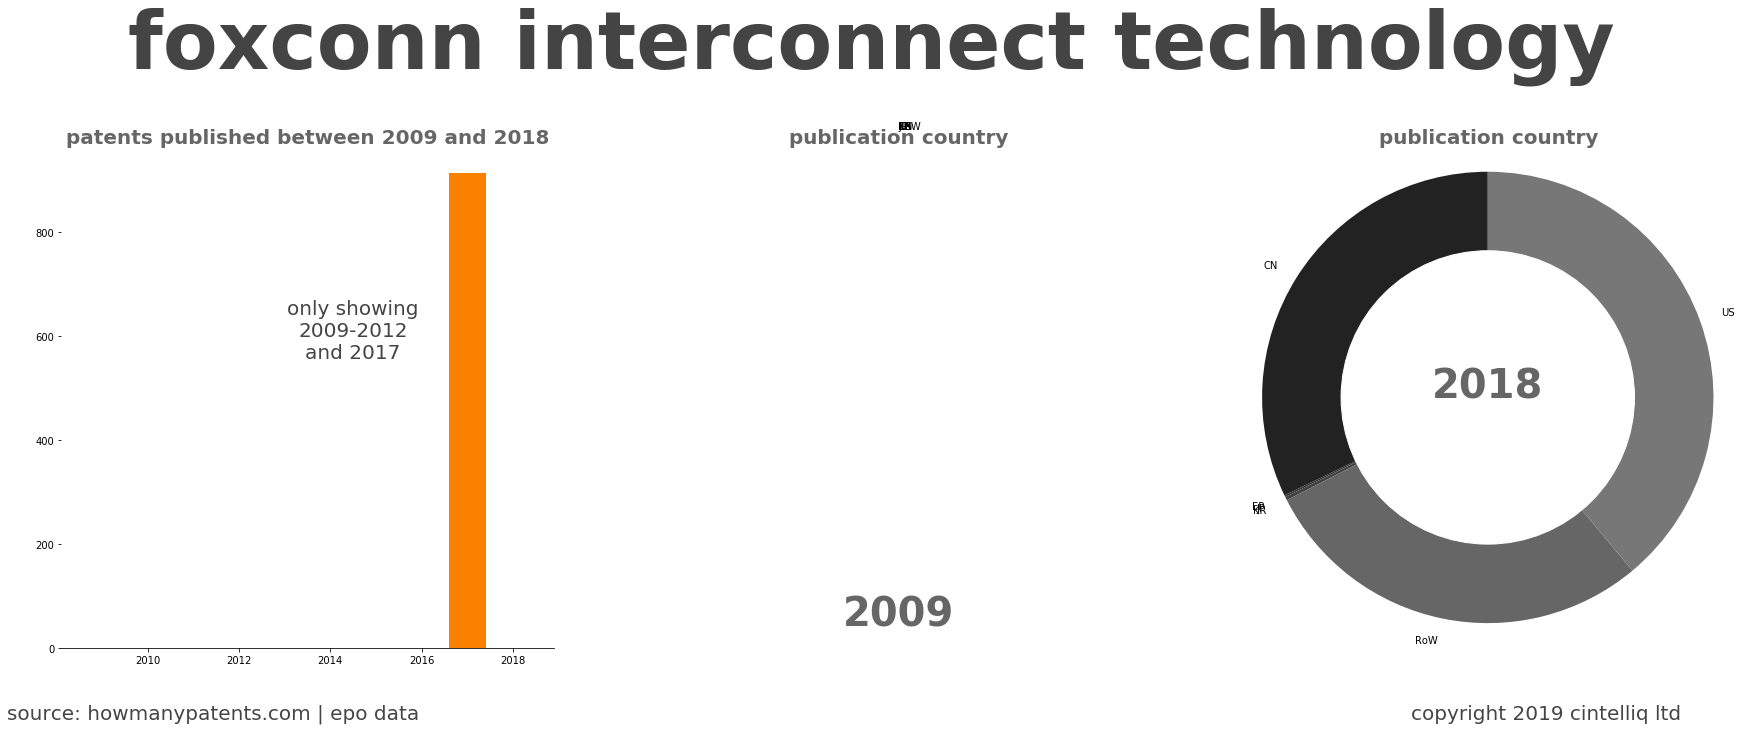 summary of patents for Foxconn Interconnect Technology